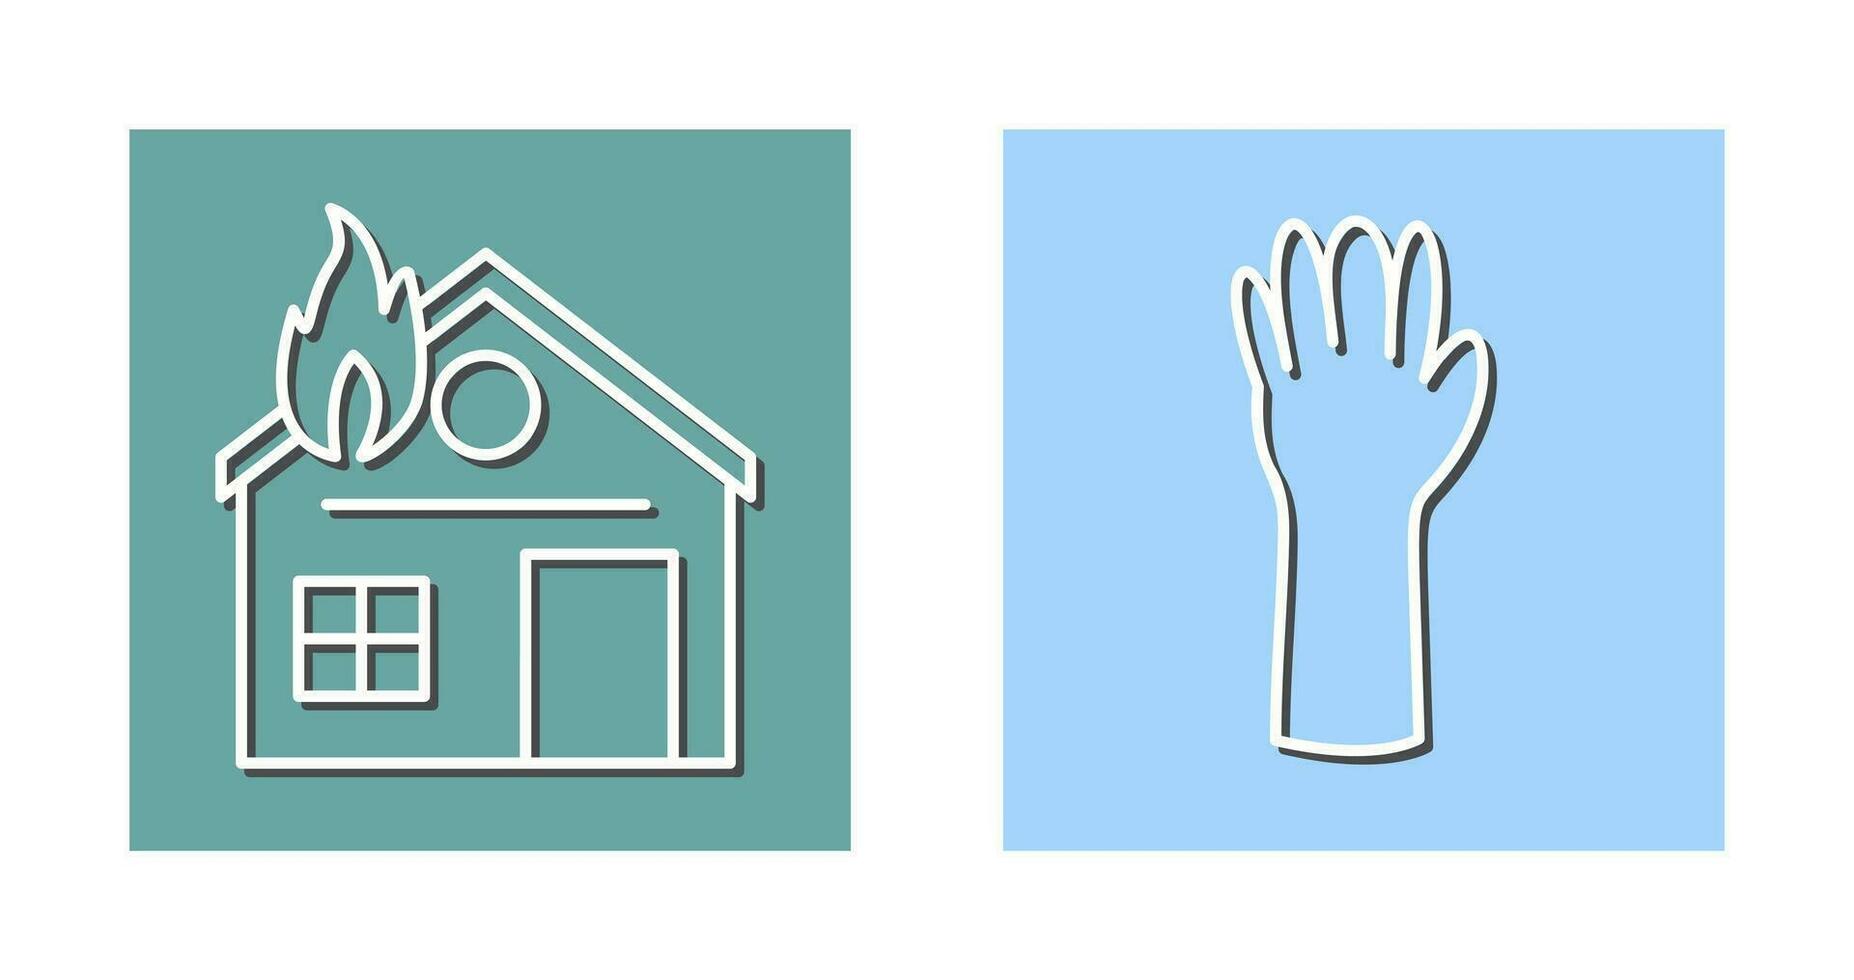 house on fire and gloves Icon vector